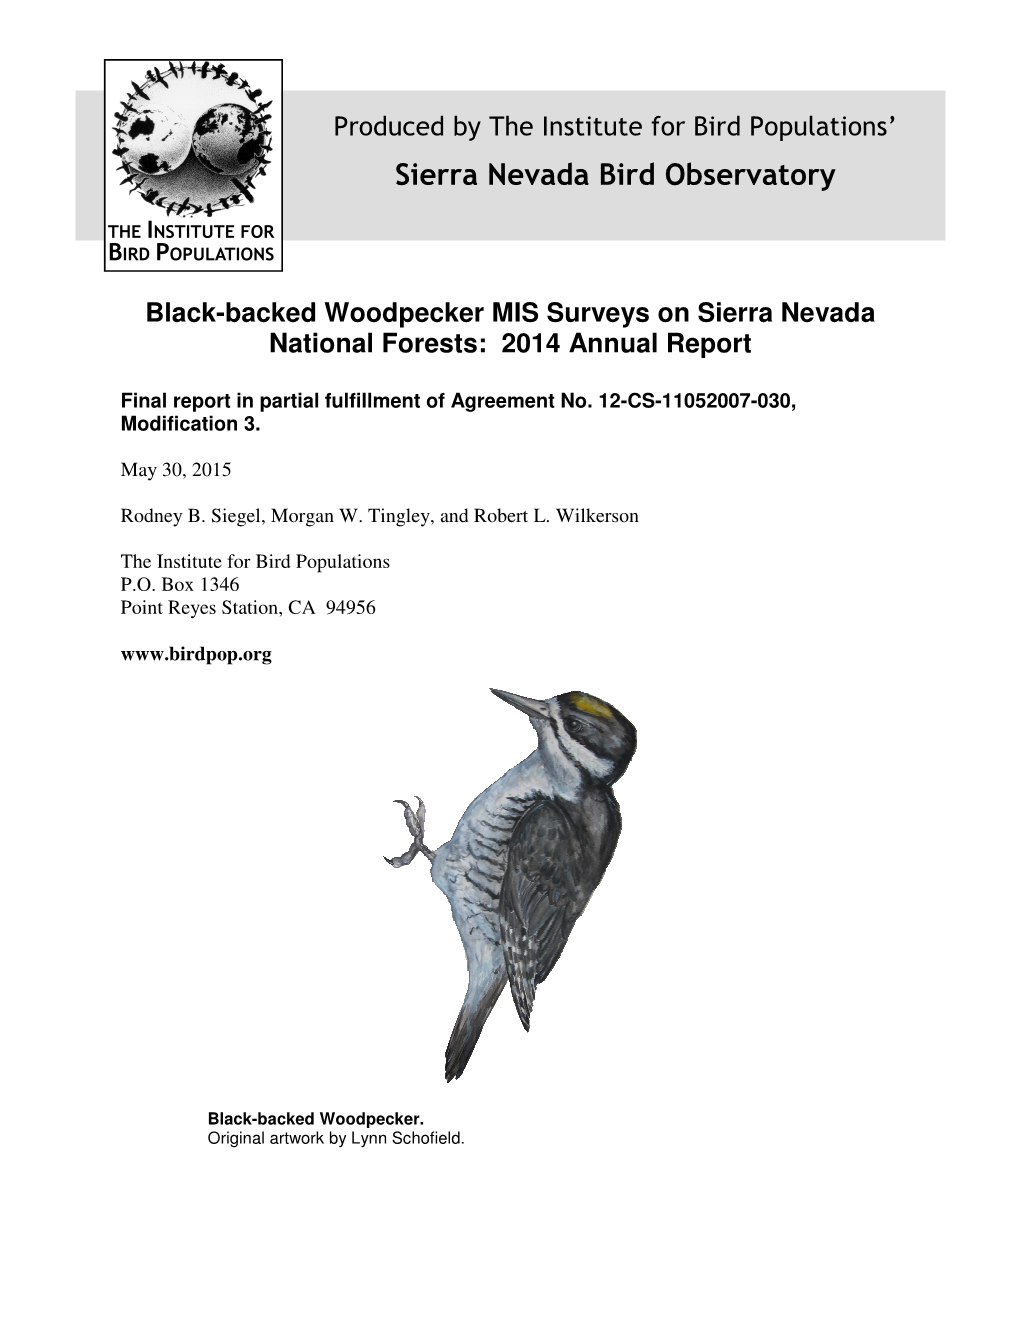 Black-Backed Woodpecker MIS Surveys on Sierra Nevada National Forests: 2014 Annual Report